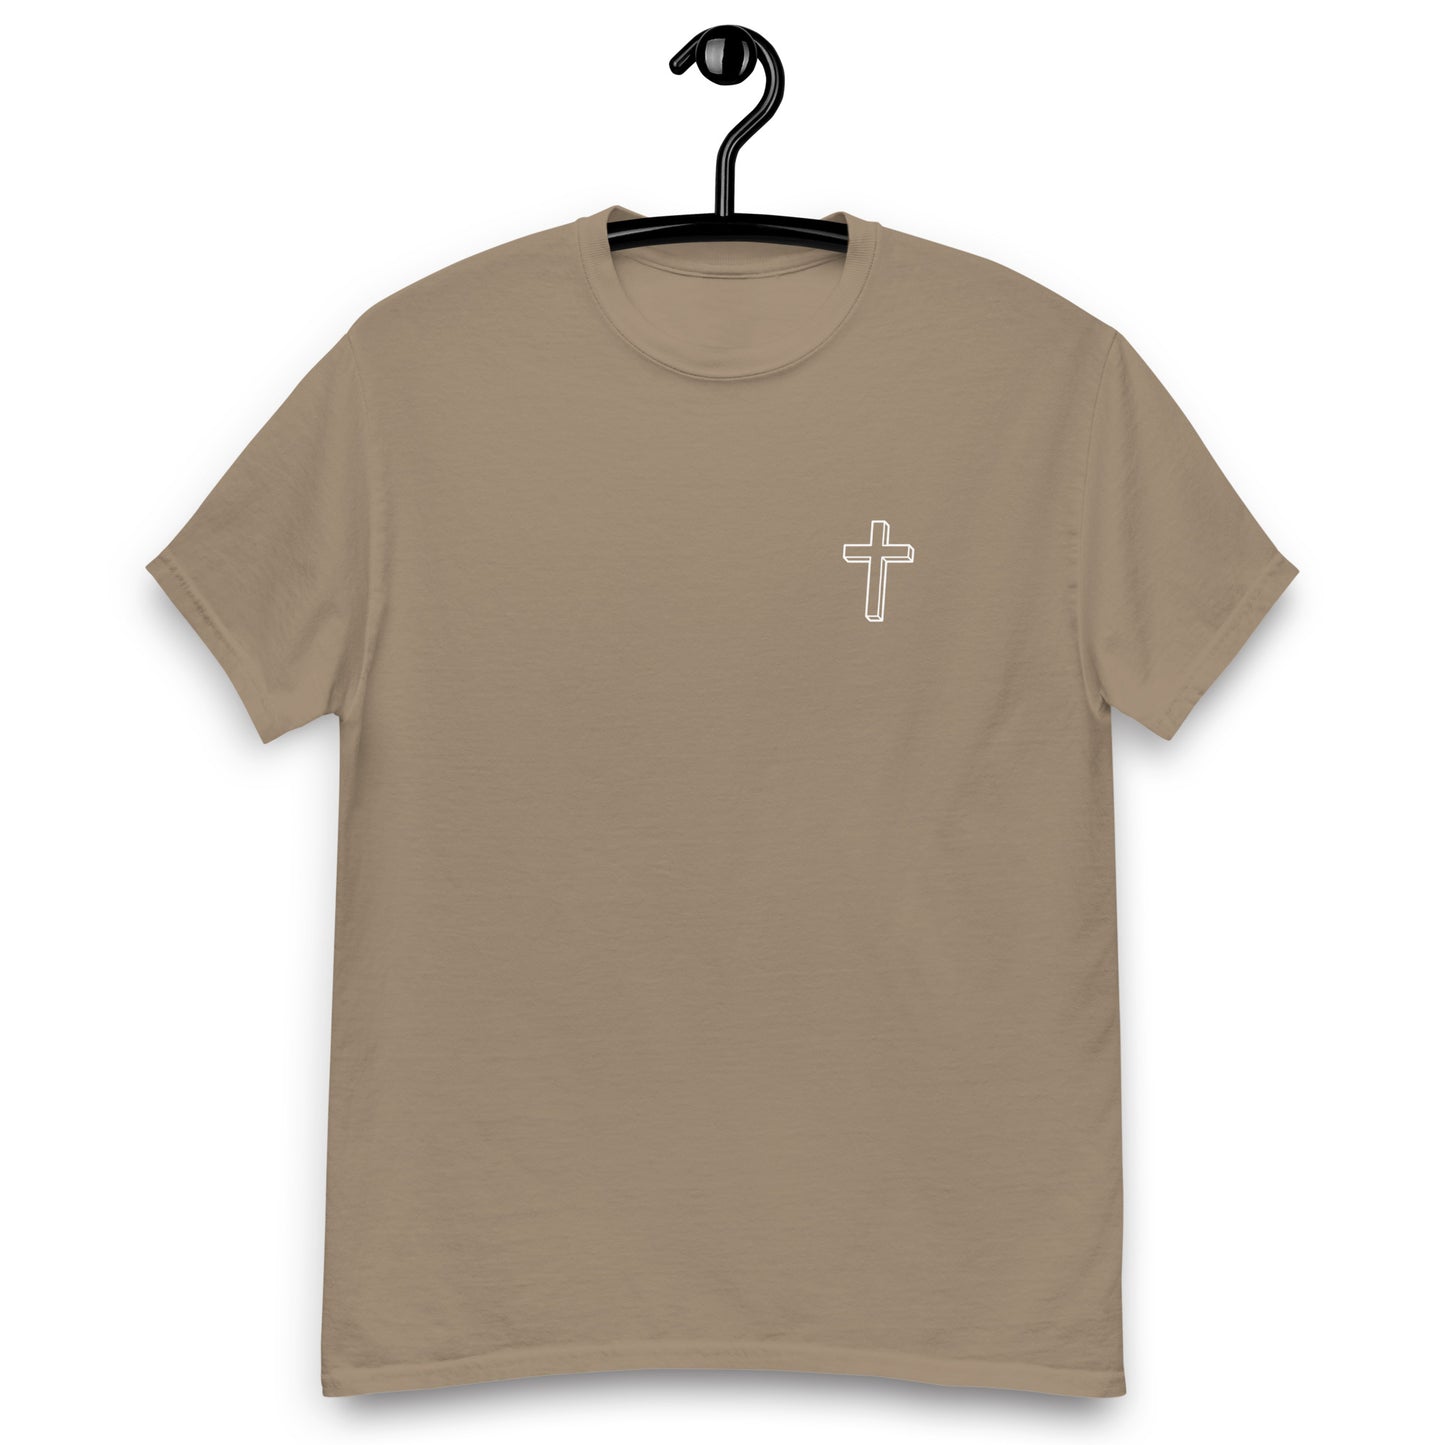 Lord I need you T-shirt